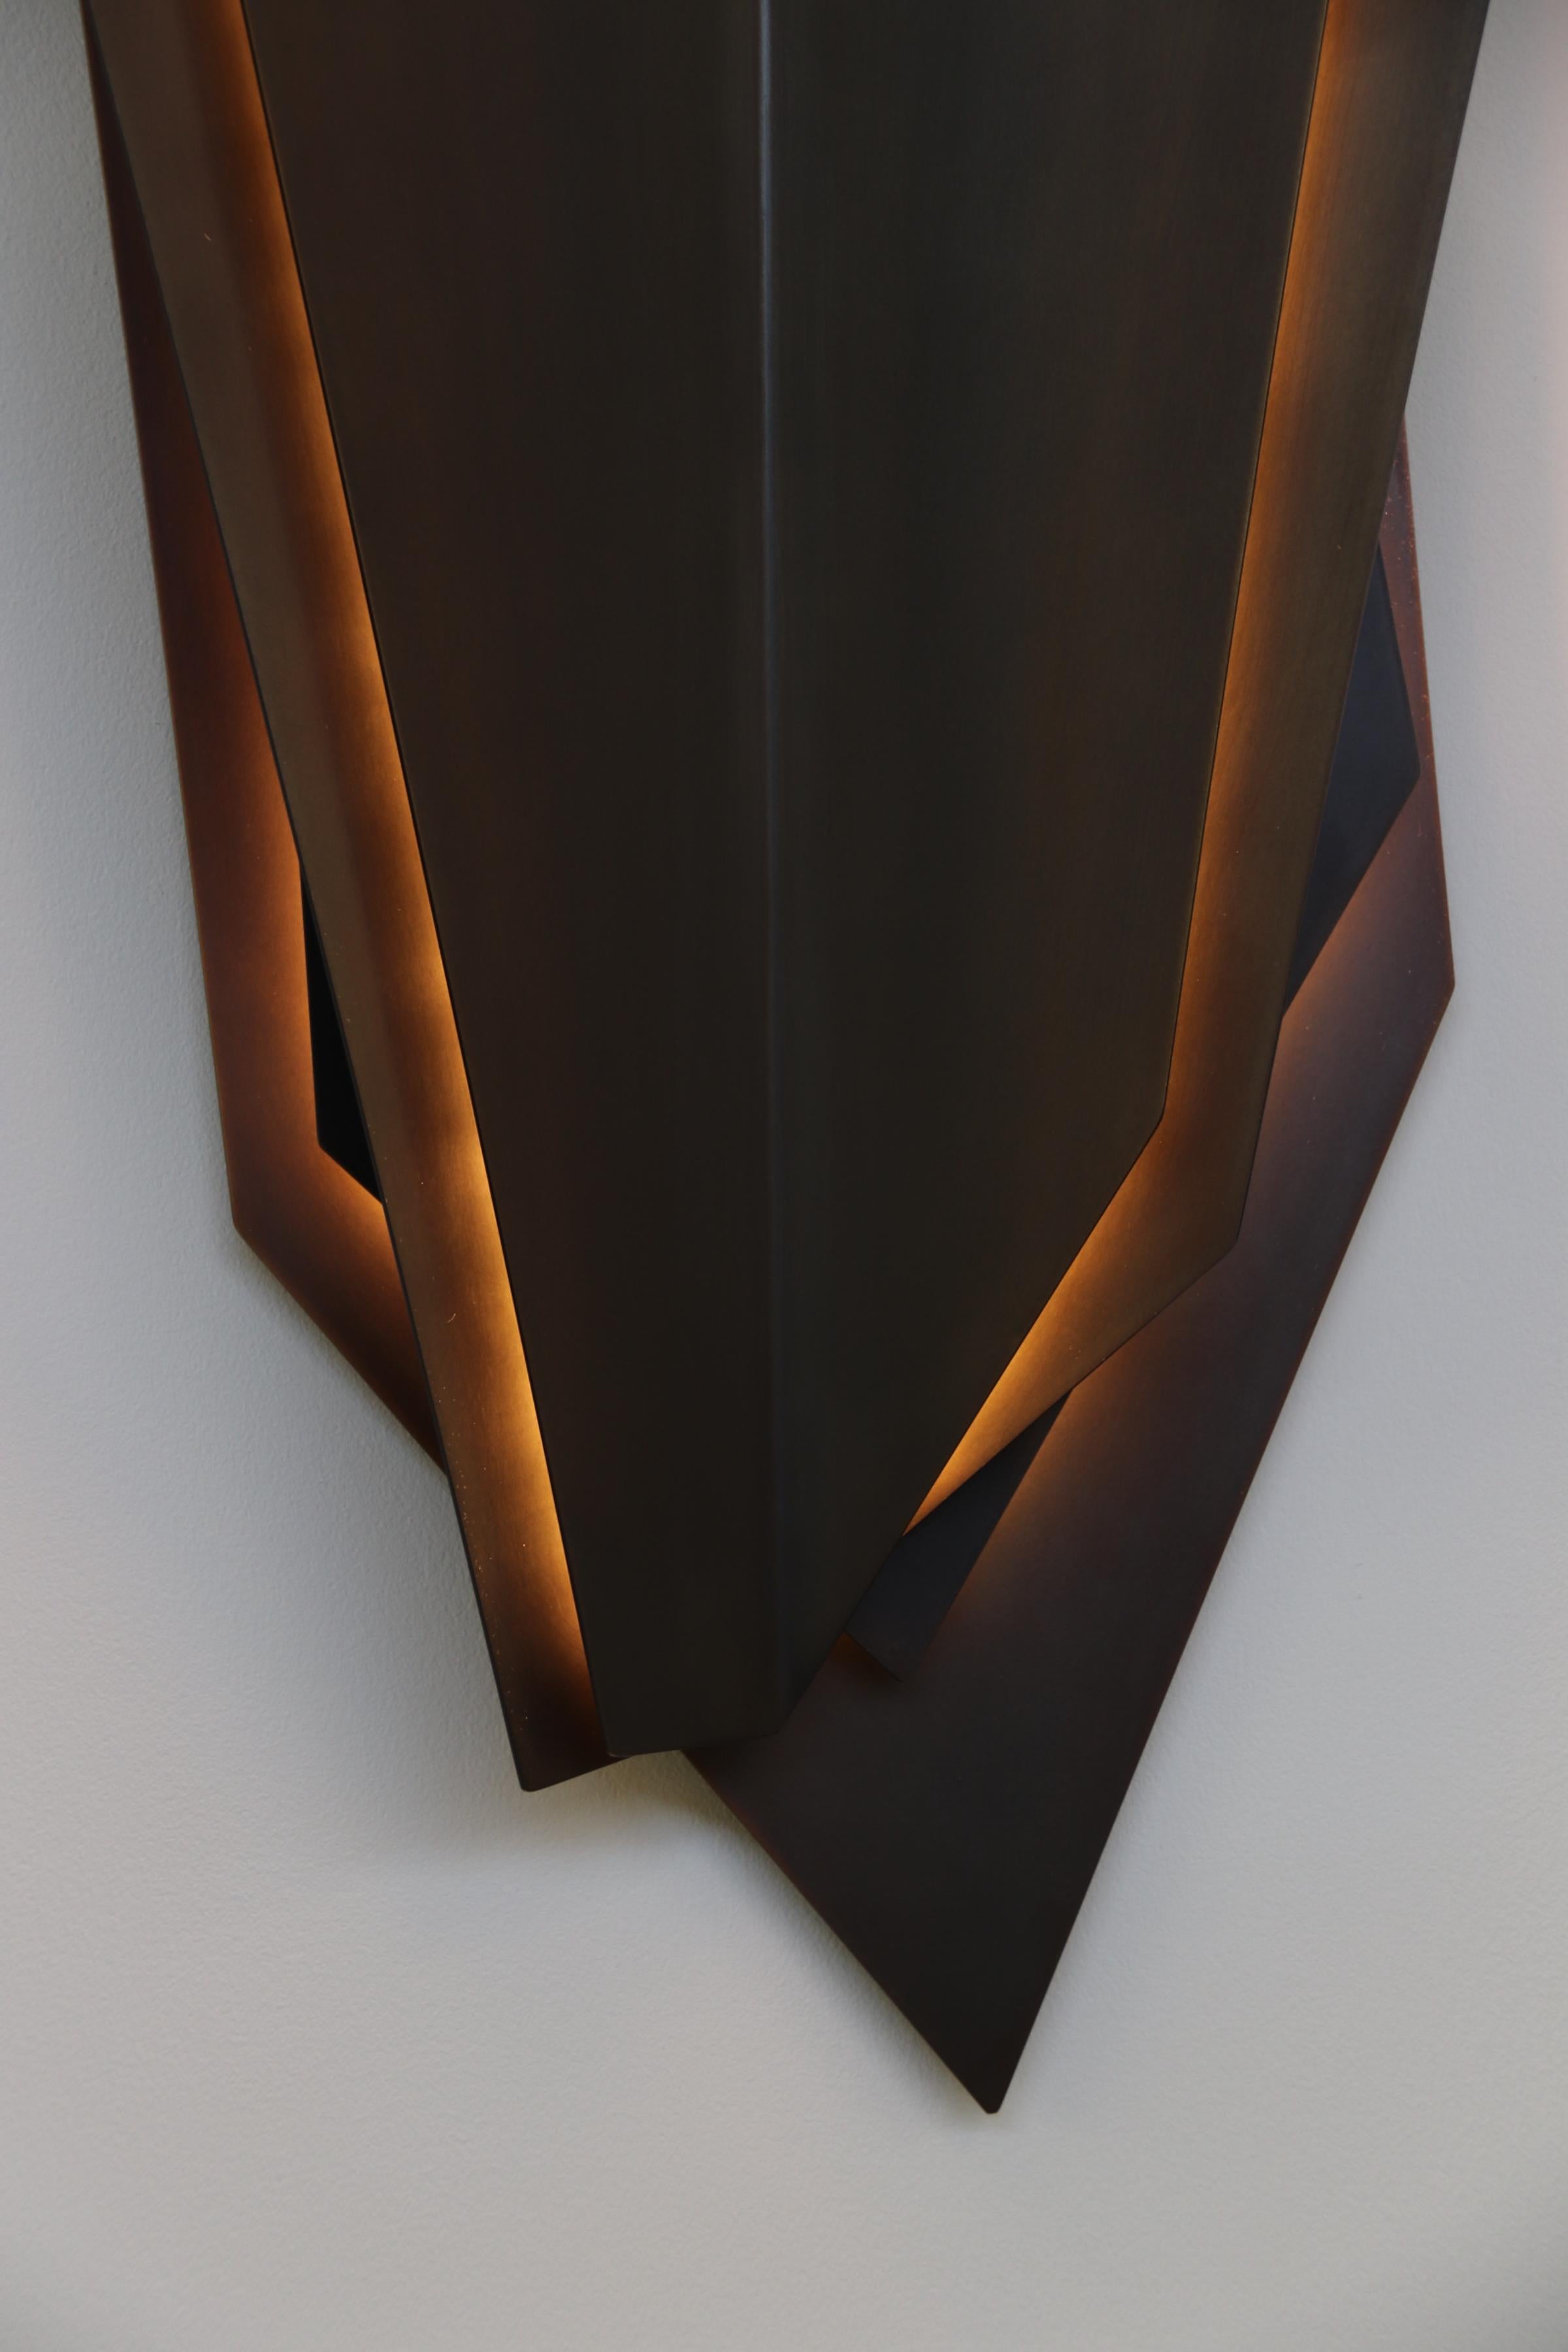 Other Continuum 900 Wall Sconce by Lost Profile Studio For Sale